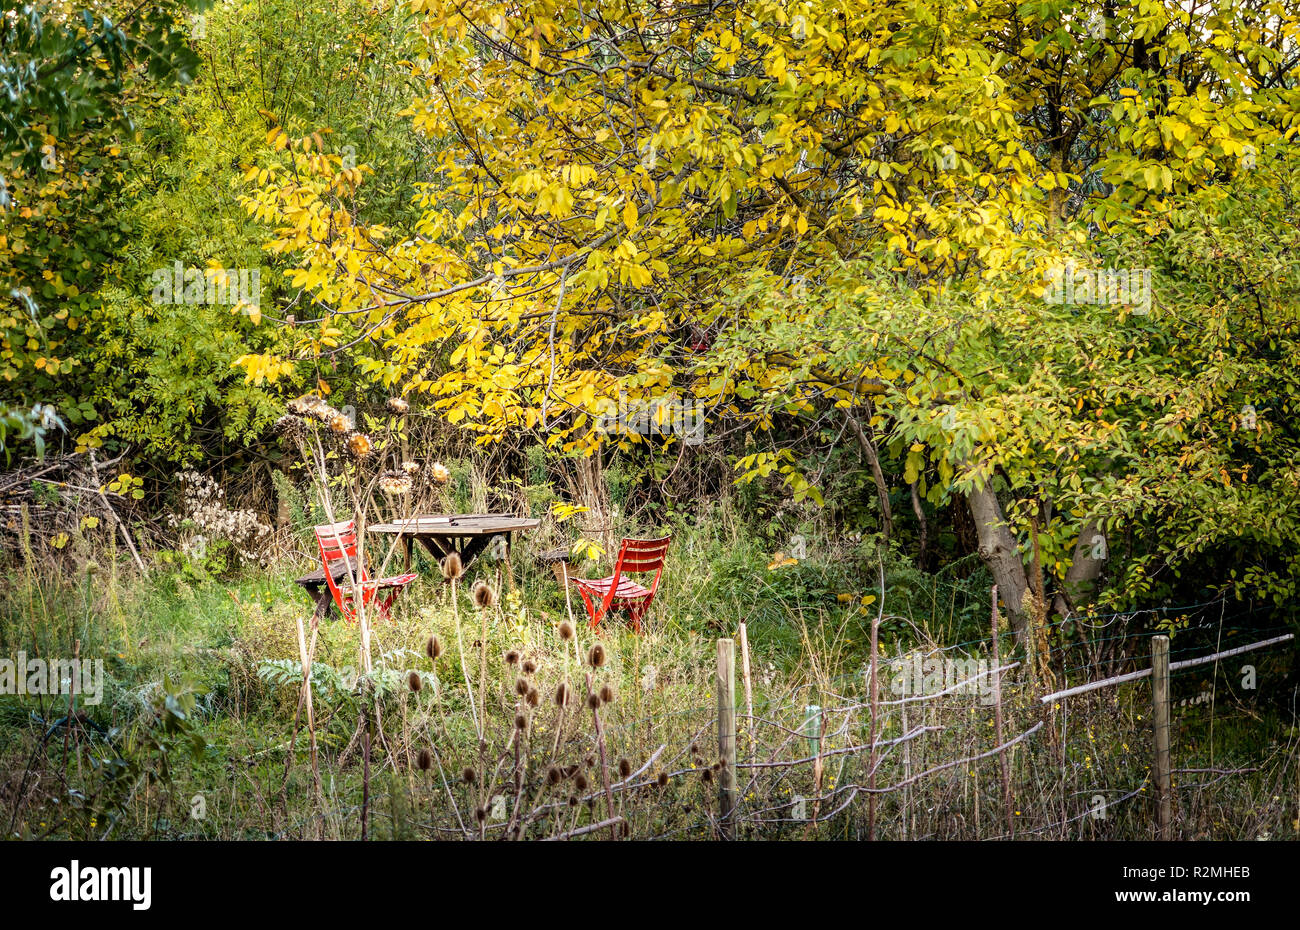 Wild garden with table and red chairs surrounded by trees in autumn Stock Photo